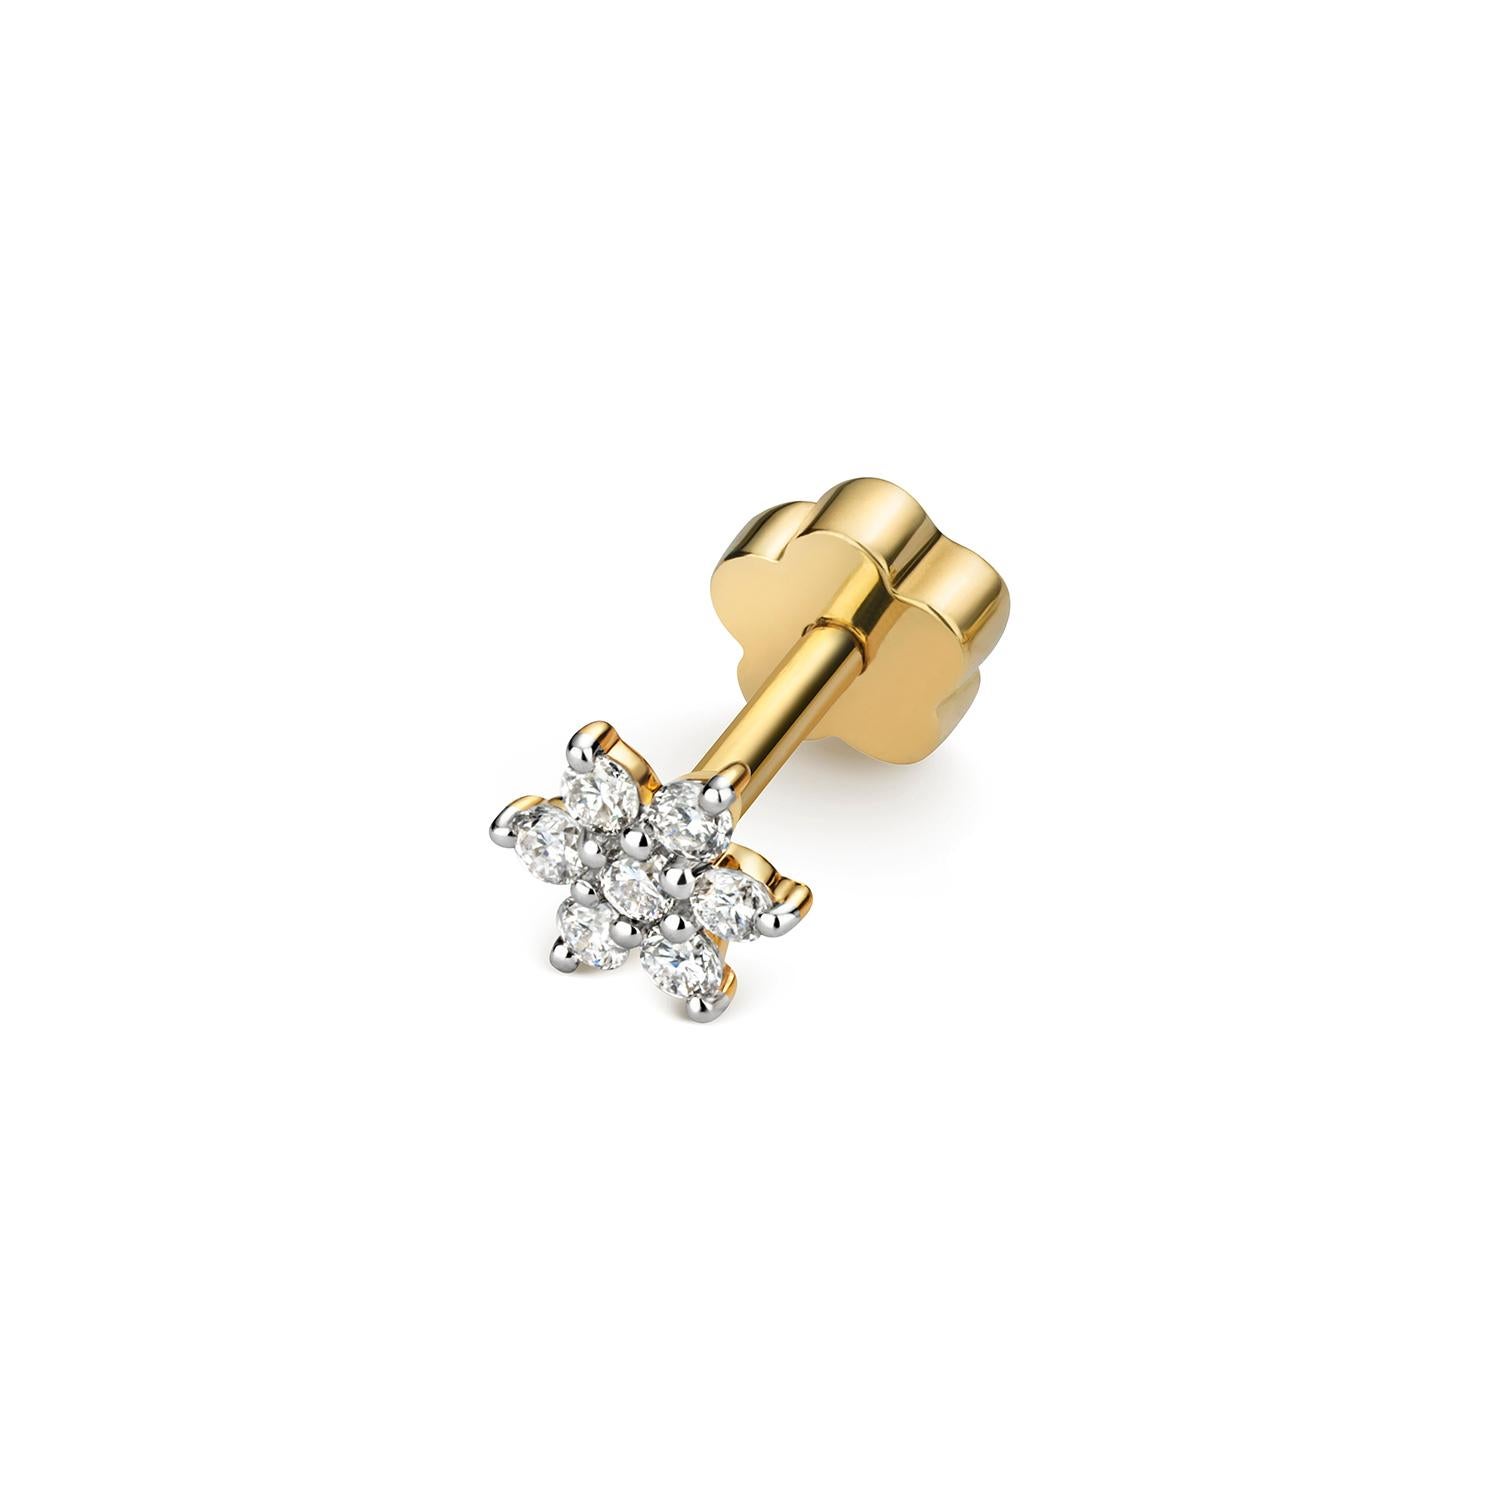 DIAMOND CARTILAGE FLOWER STUD

9CT Y/G GH SI3-I1 0.07CT

Weight: 0.35g

Number Of Stones:7

Total Carates:0.070